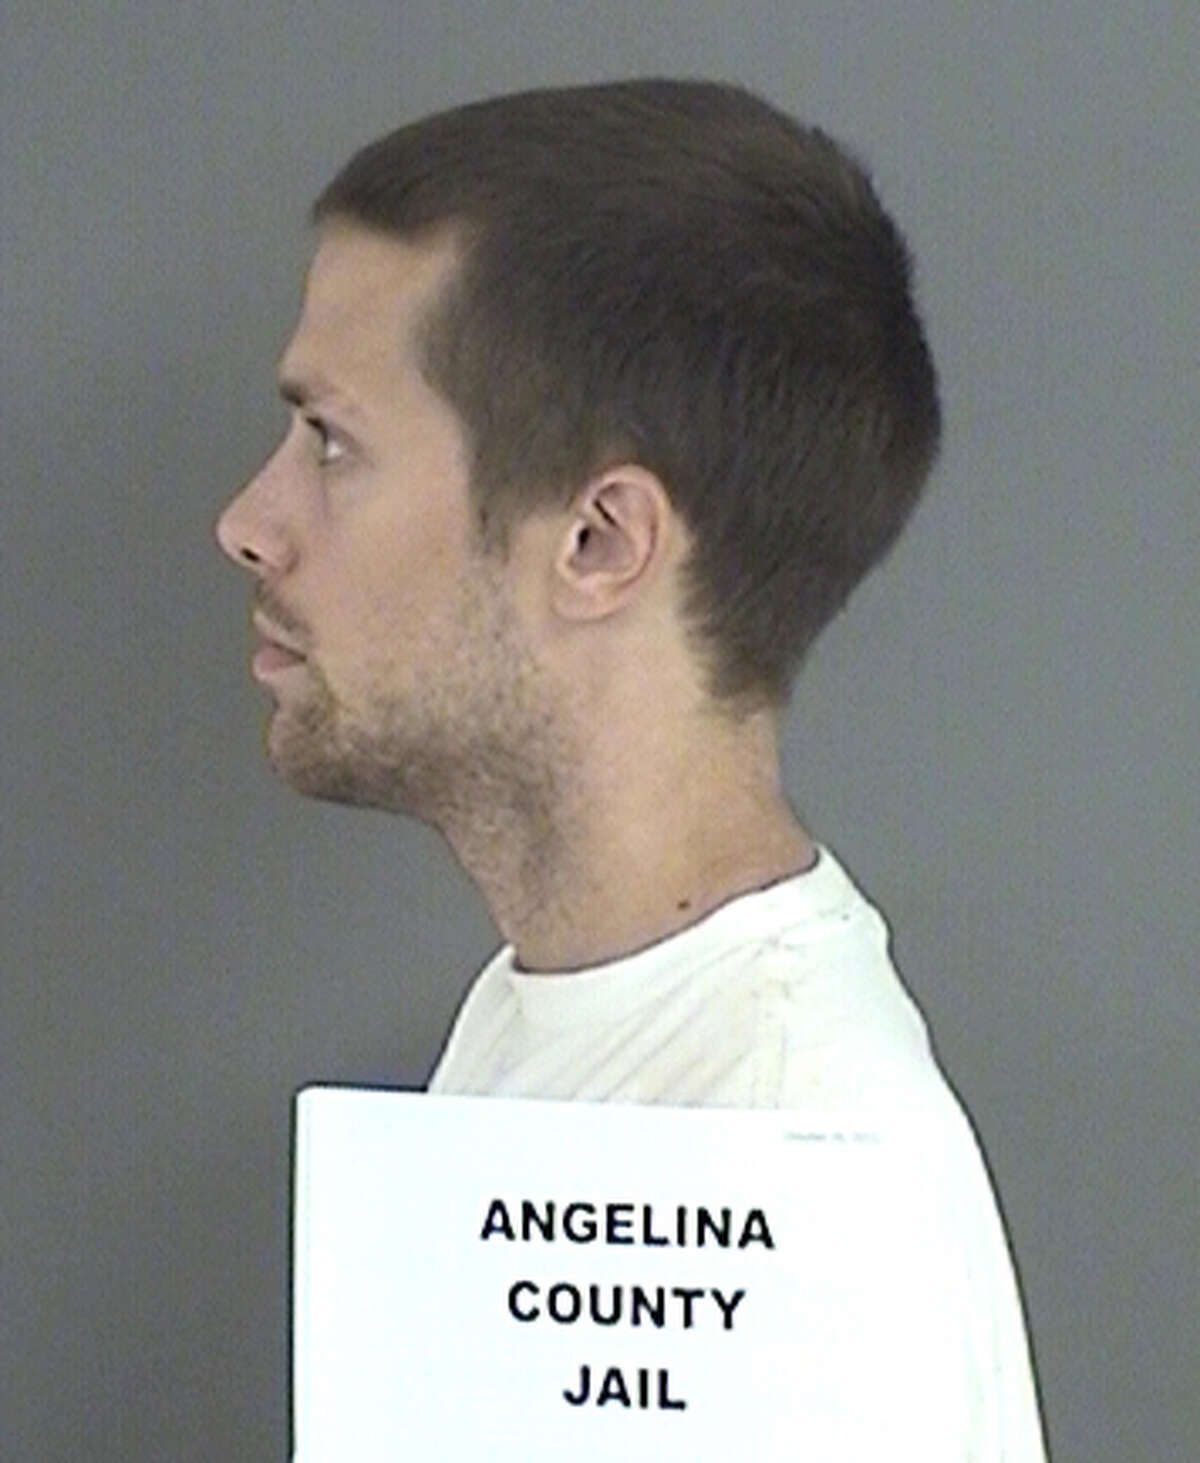 Police and Texas Rangers arrested Justin Welch, 32, Monday in San Antonio. He is accused of killing a woman in Angelina County when he learned she had HIV after she gave him oral sex.